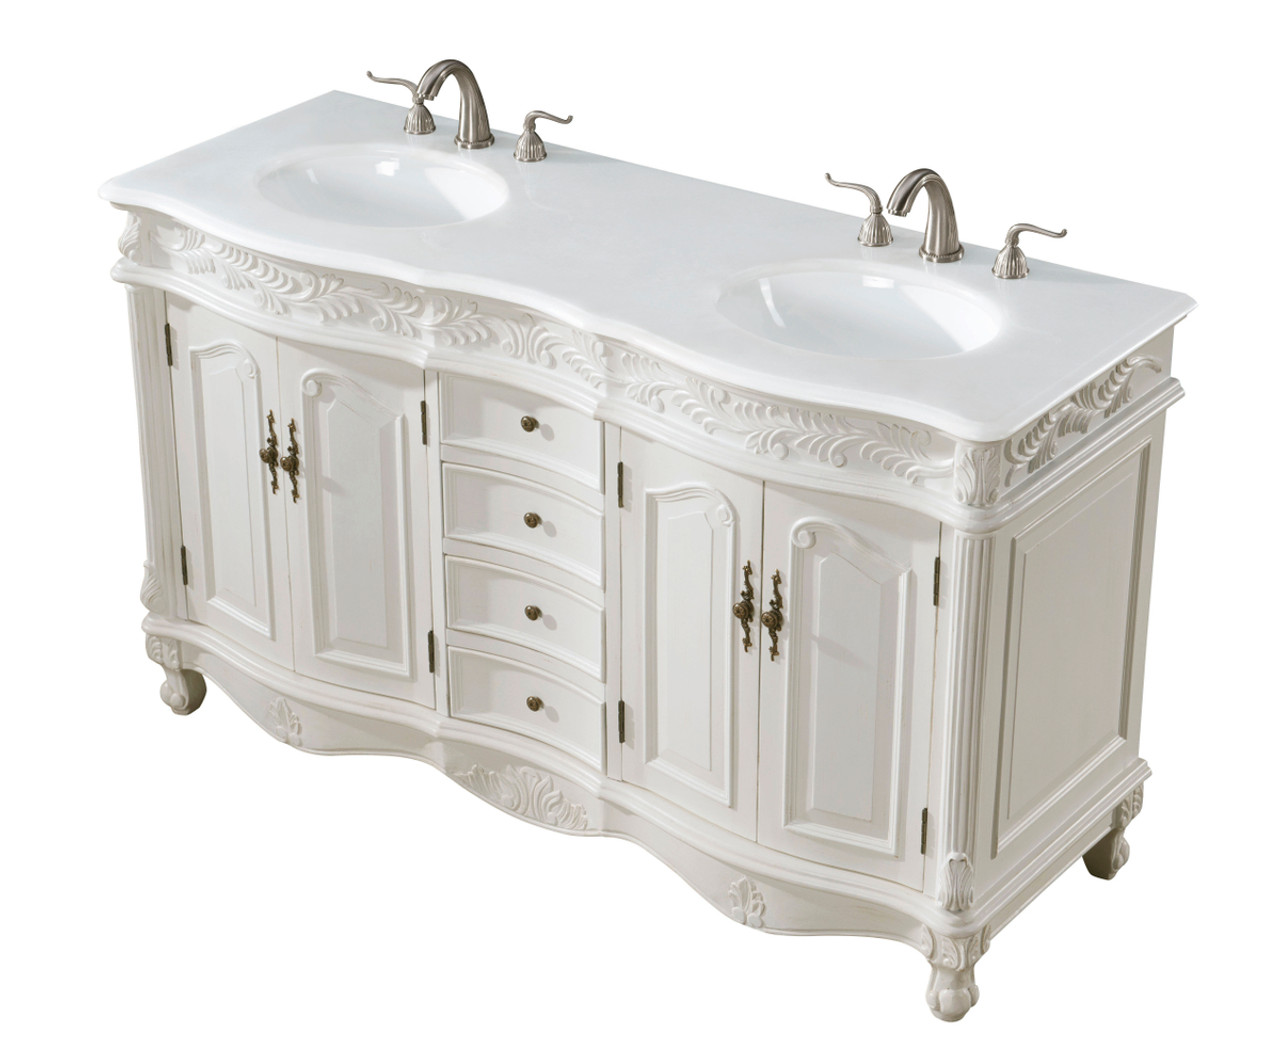 Elegant Kitchen and Bath VF-1049-VW 60 inch Double Bathroom vanity in Antique white with ivory white engineered marble